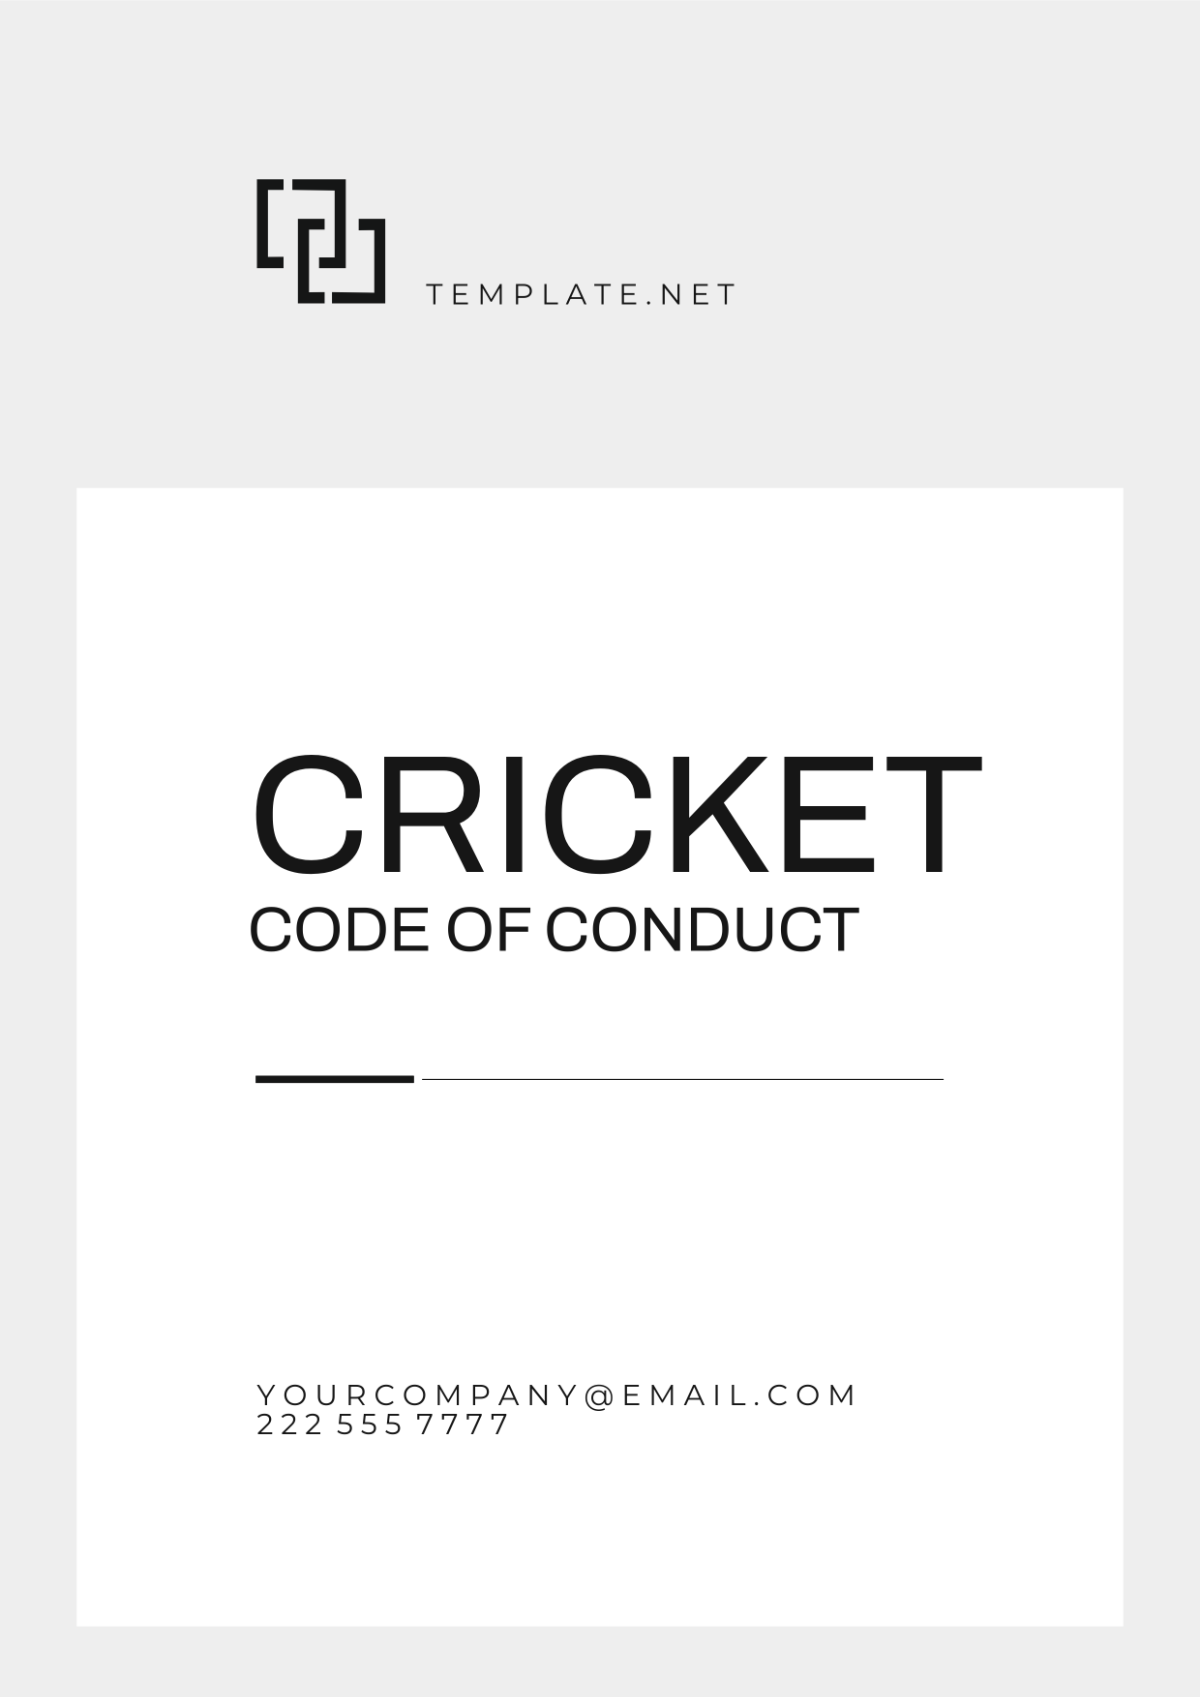 Cricket Code of Conduct Template